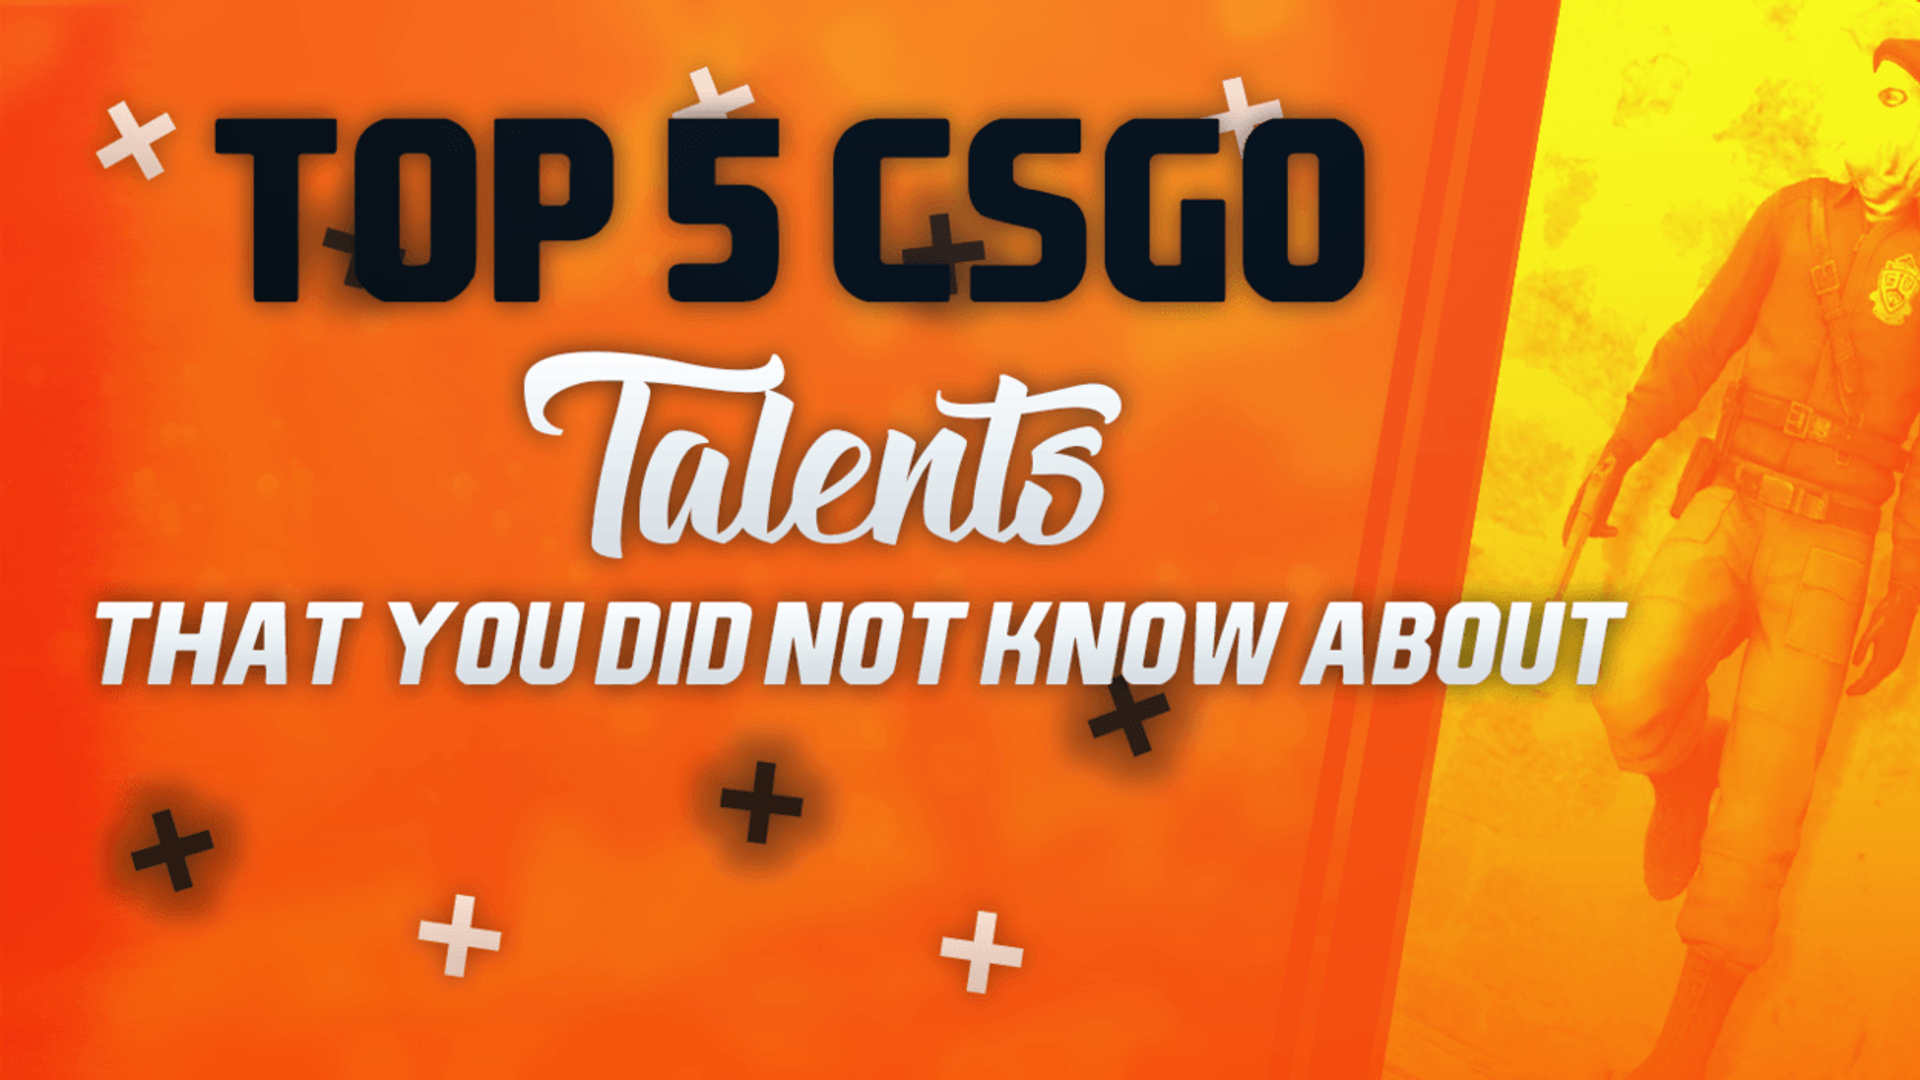 Top 5 CS:GO Talents That You’ve Most Likely Not Heard About